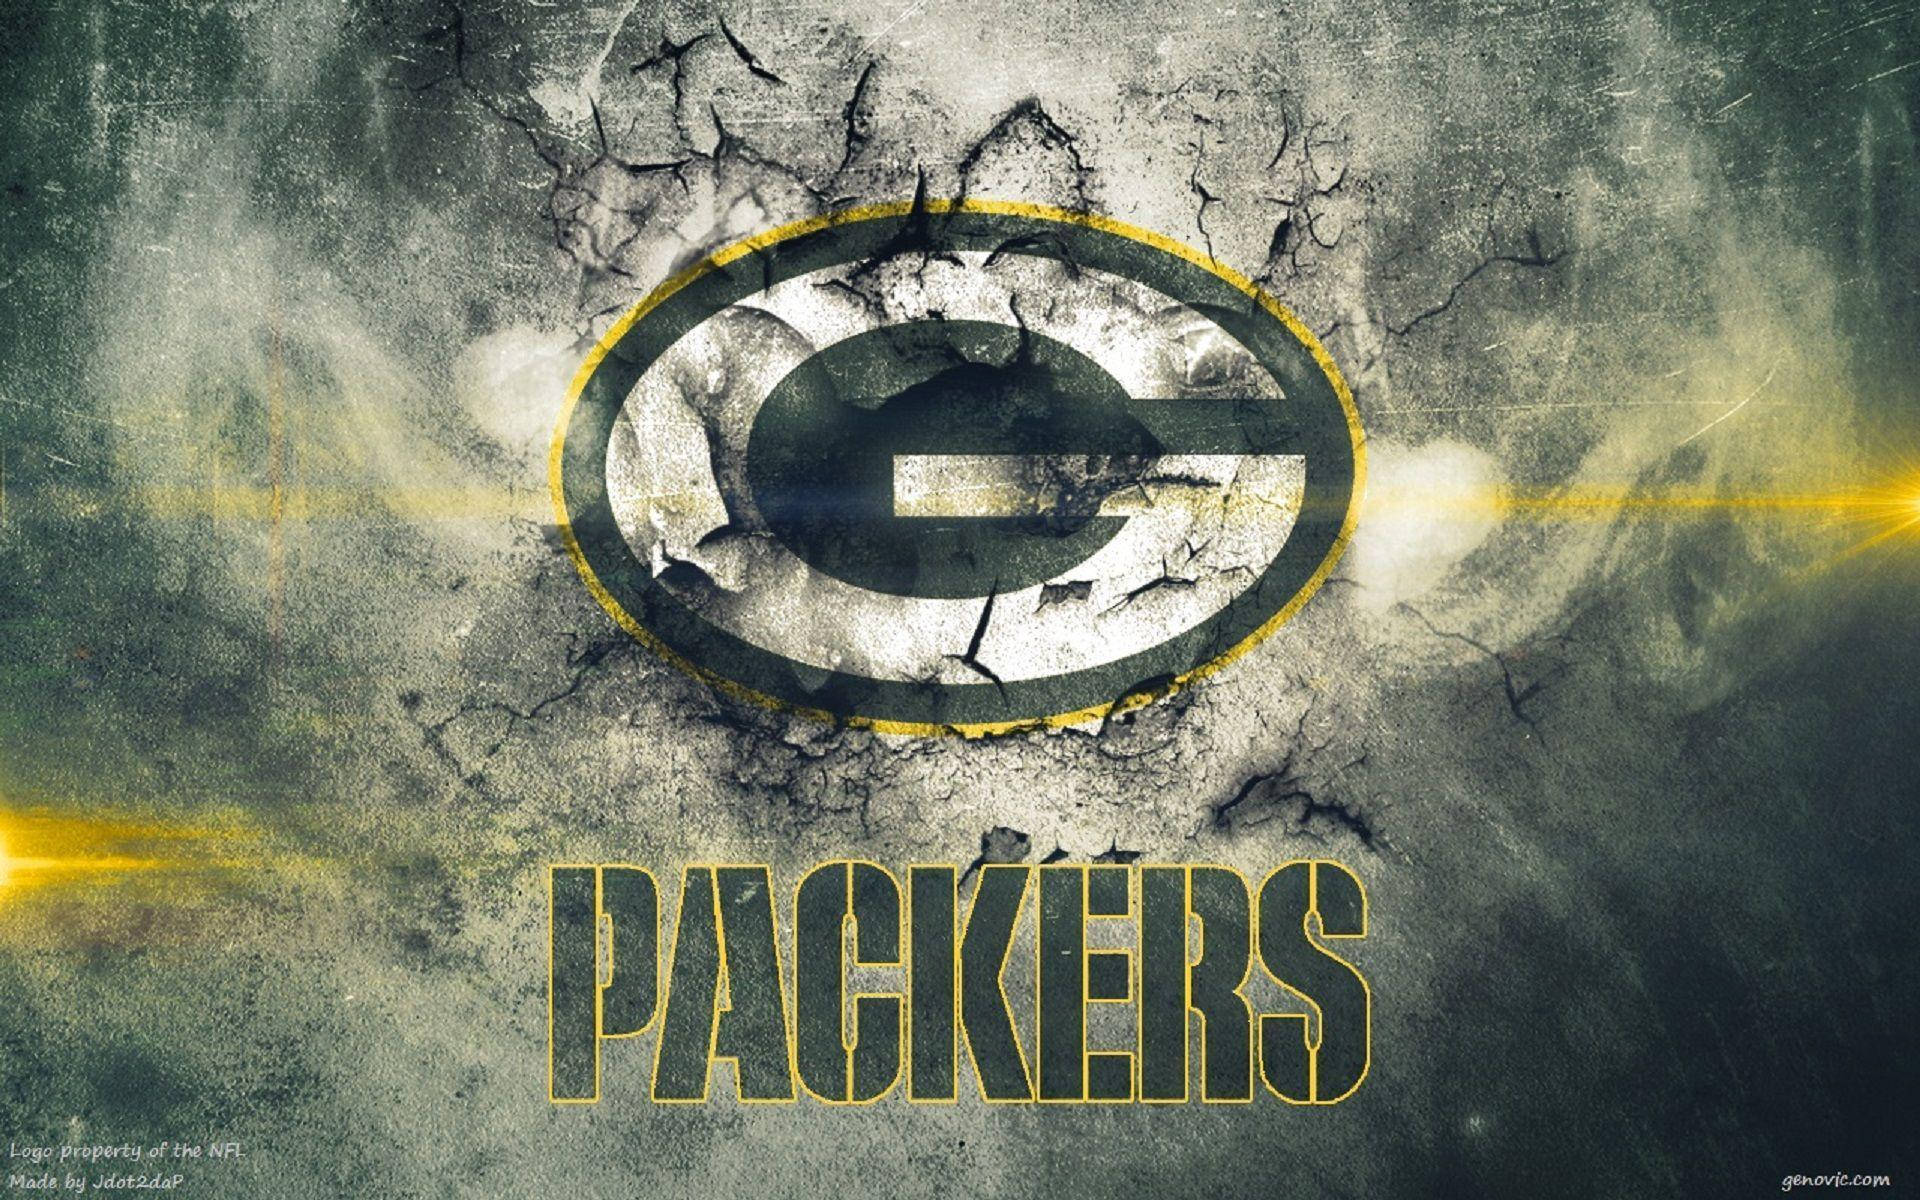 100+] Green Bay Packers Wallpapers